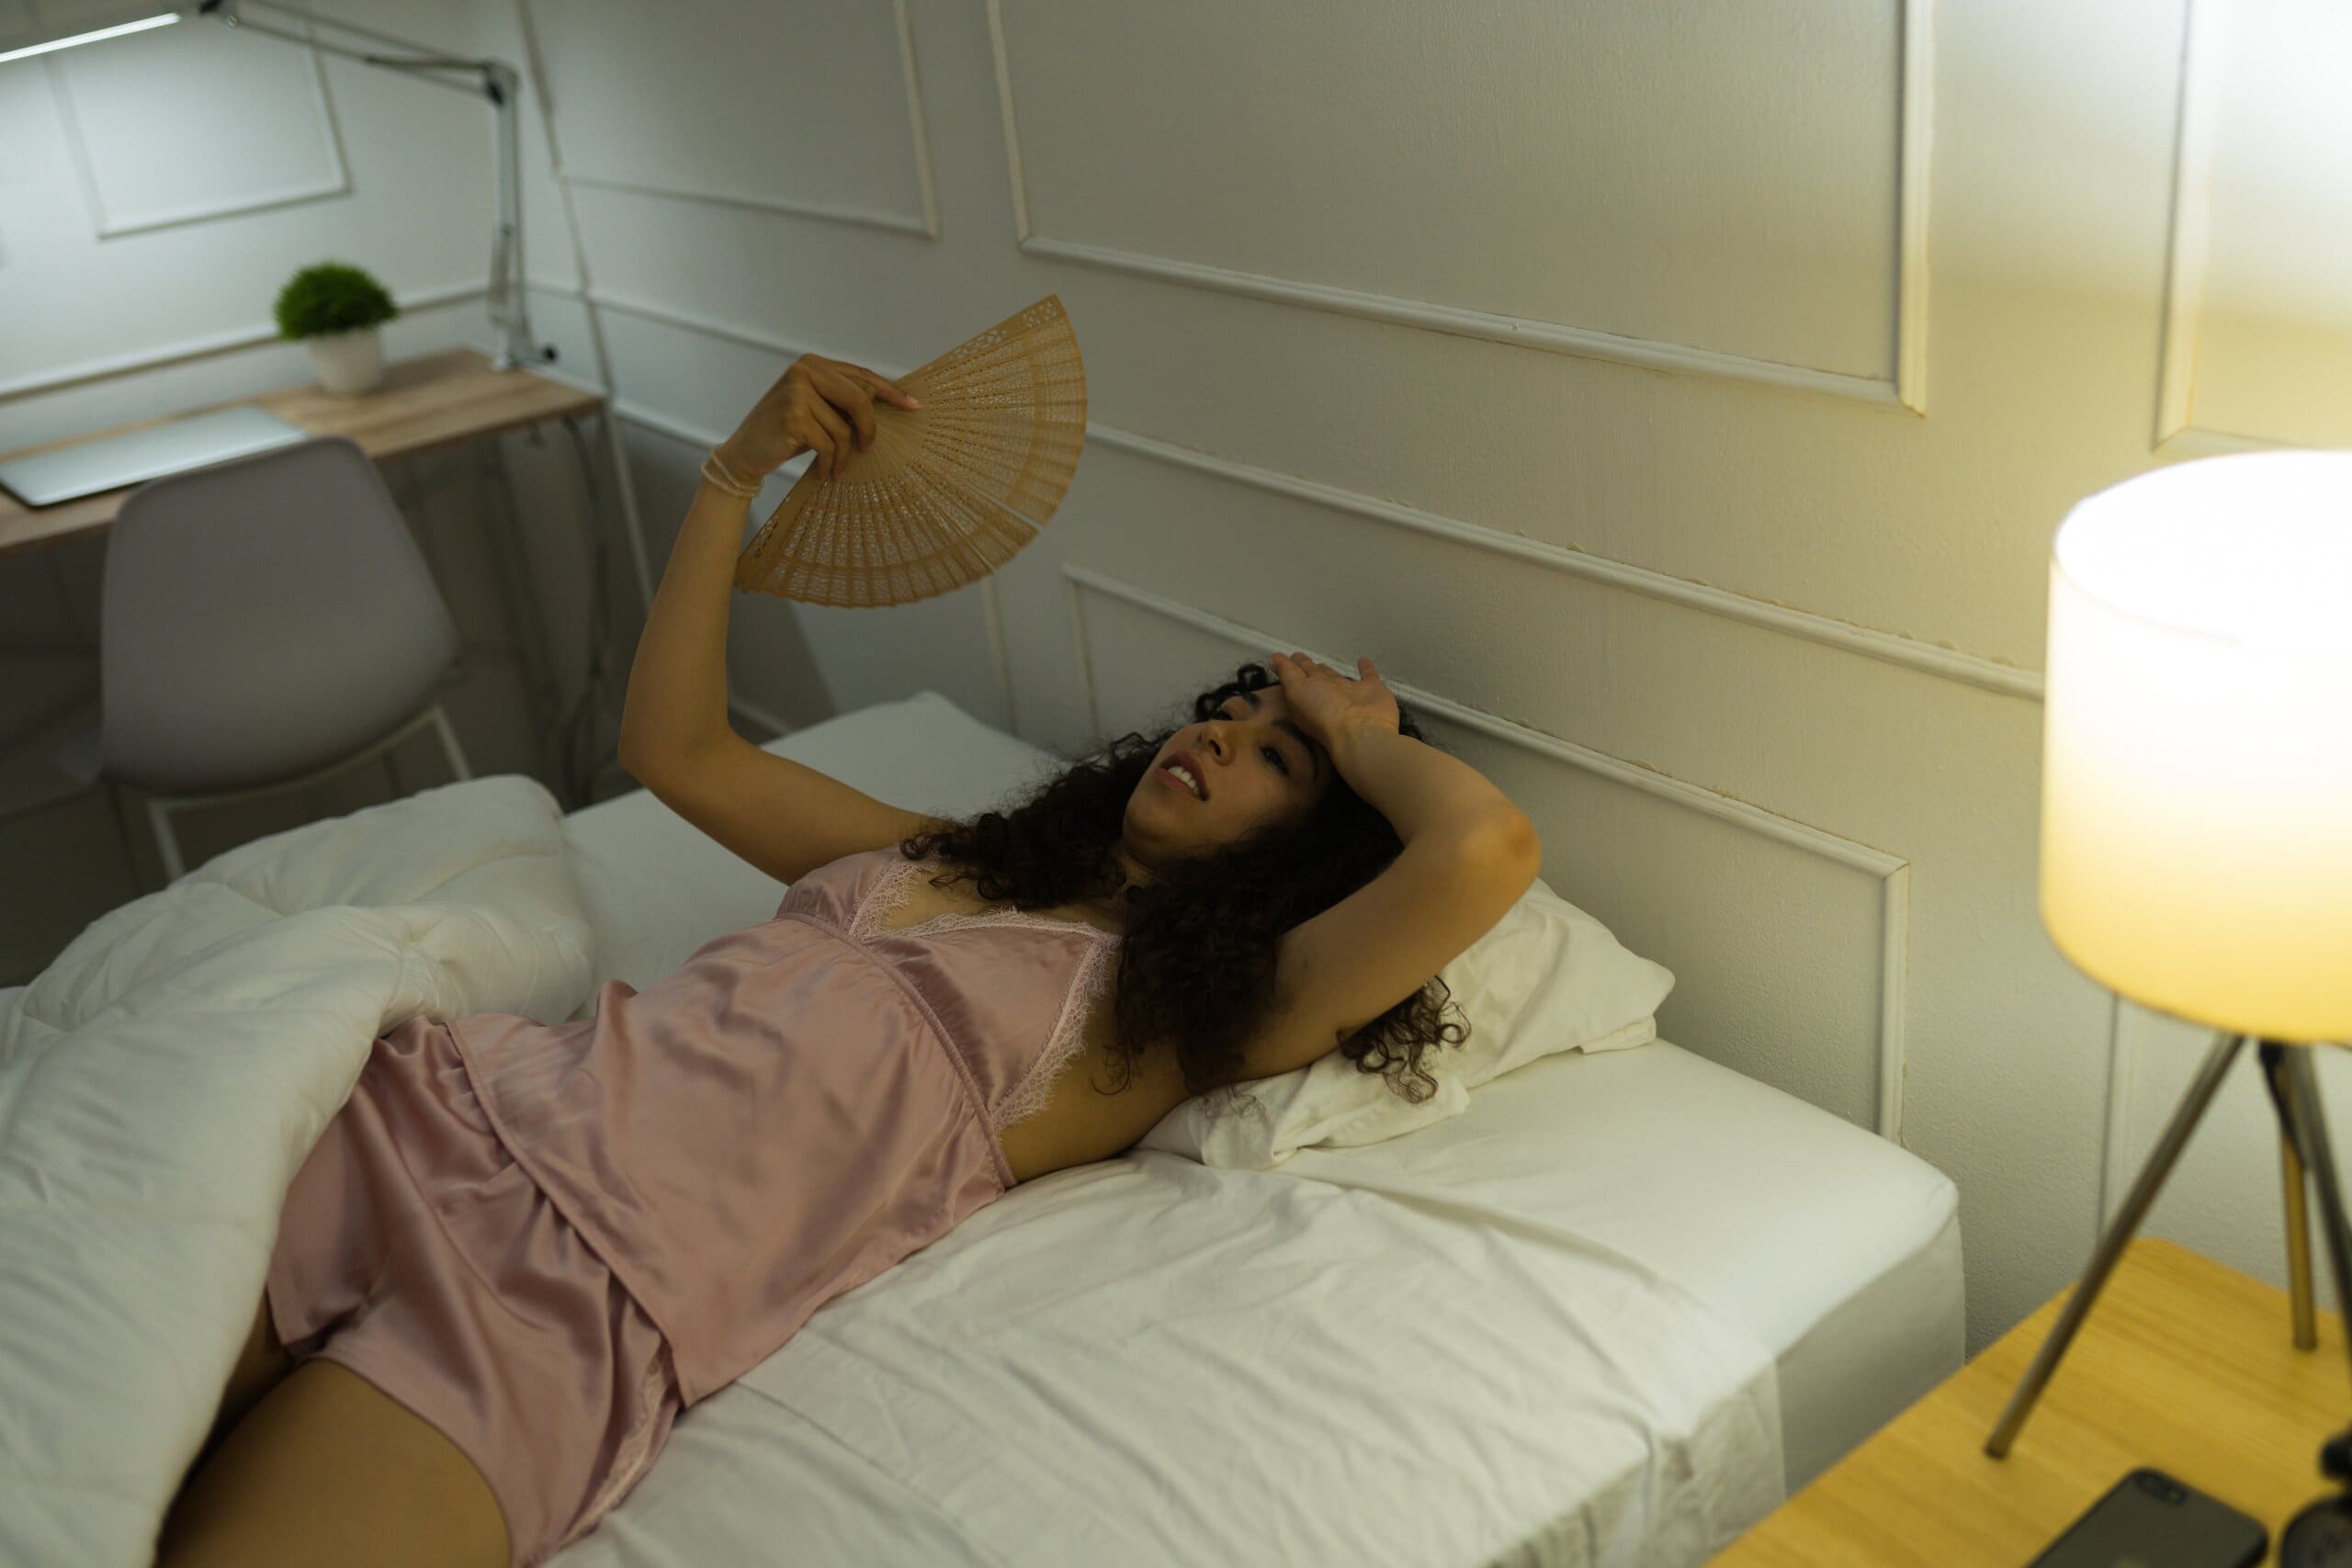 Woman laying in bed struggling to sleep in the heat, fanning herself.